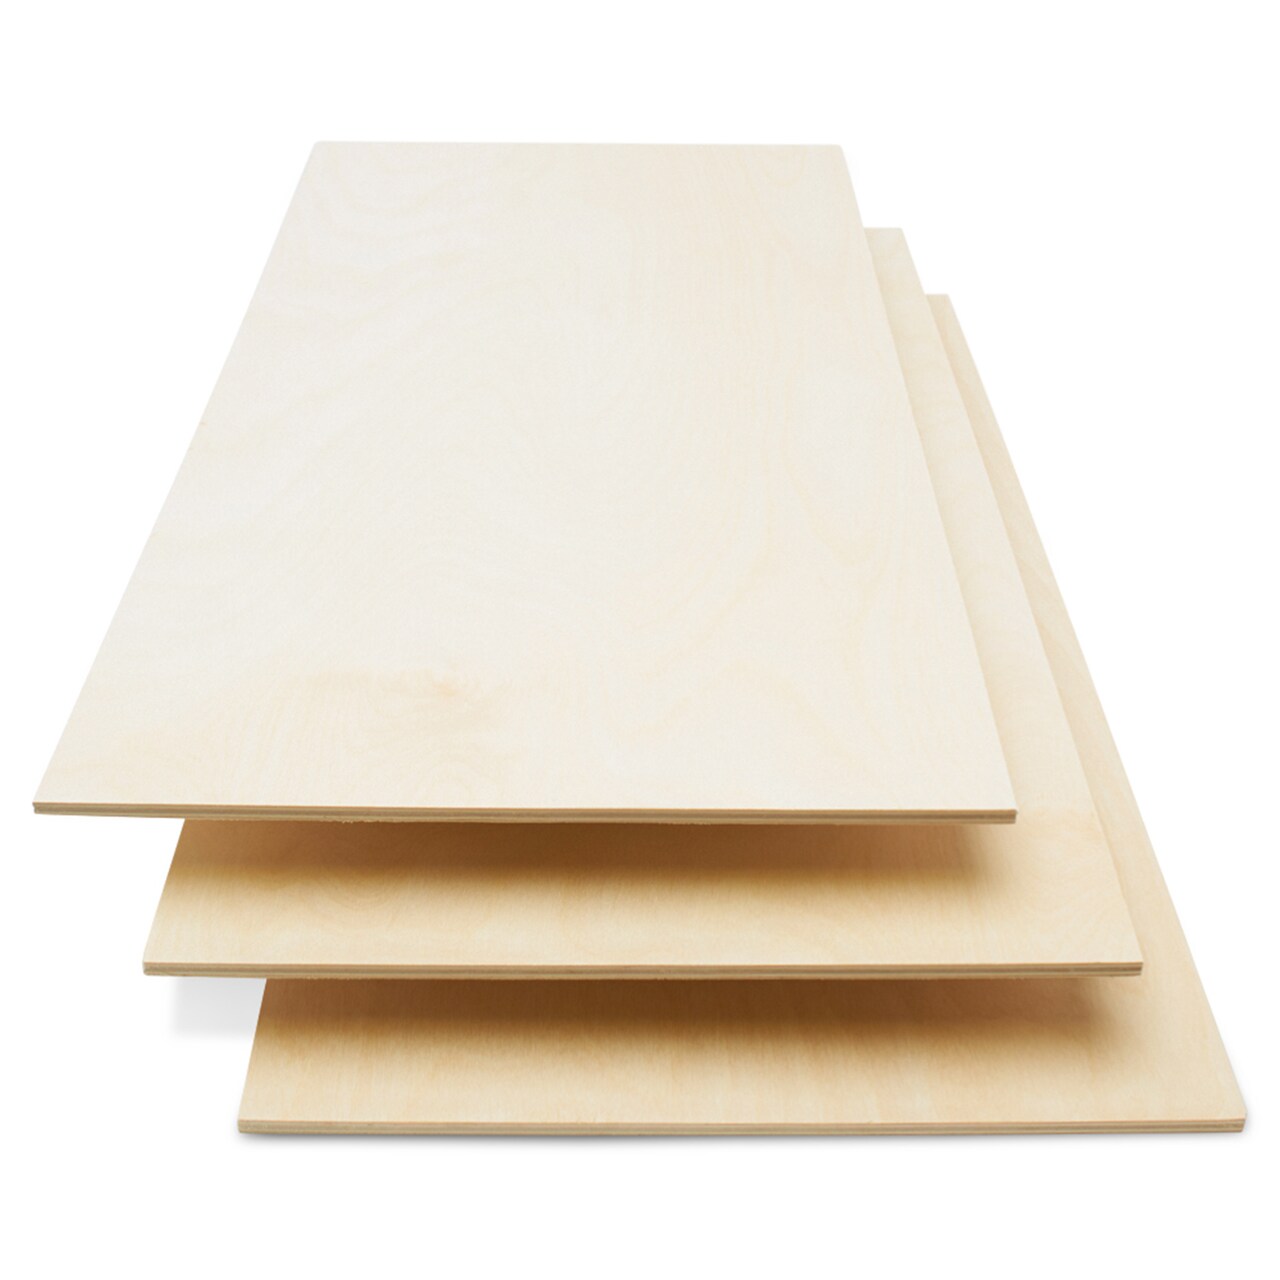 Baltic Birch Plywood, 12 x 24 Inch, B/BB Grade Sheets, 1/4 or 1/8 Inch  Thick, Woodpeckers